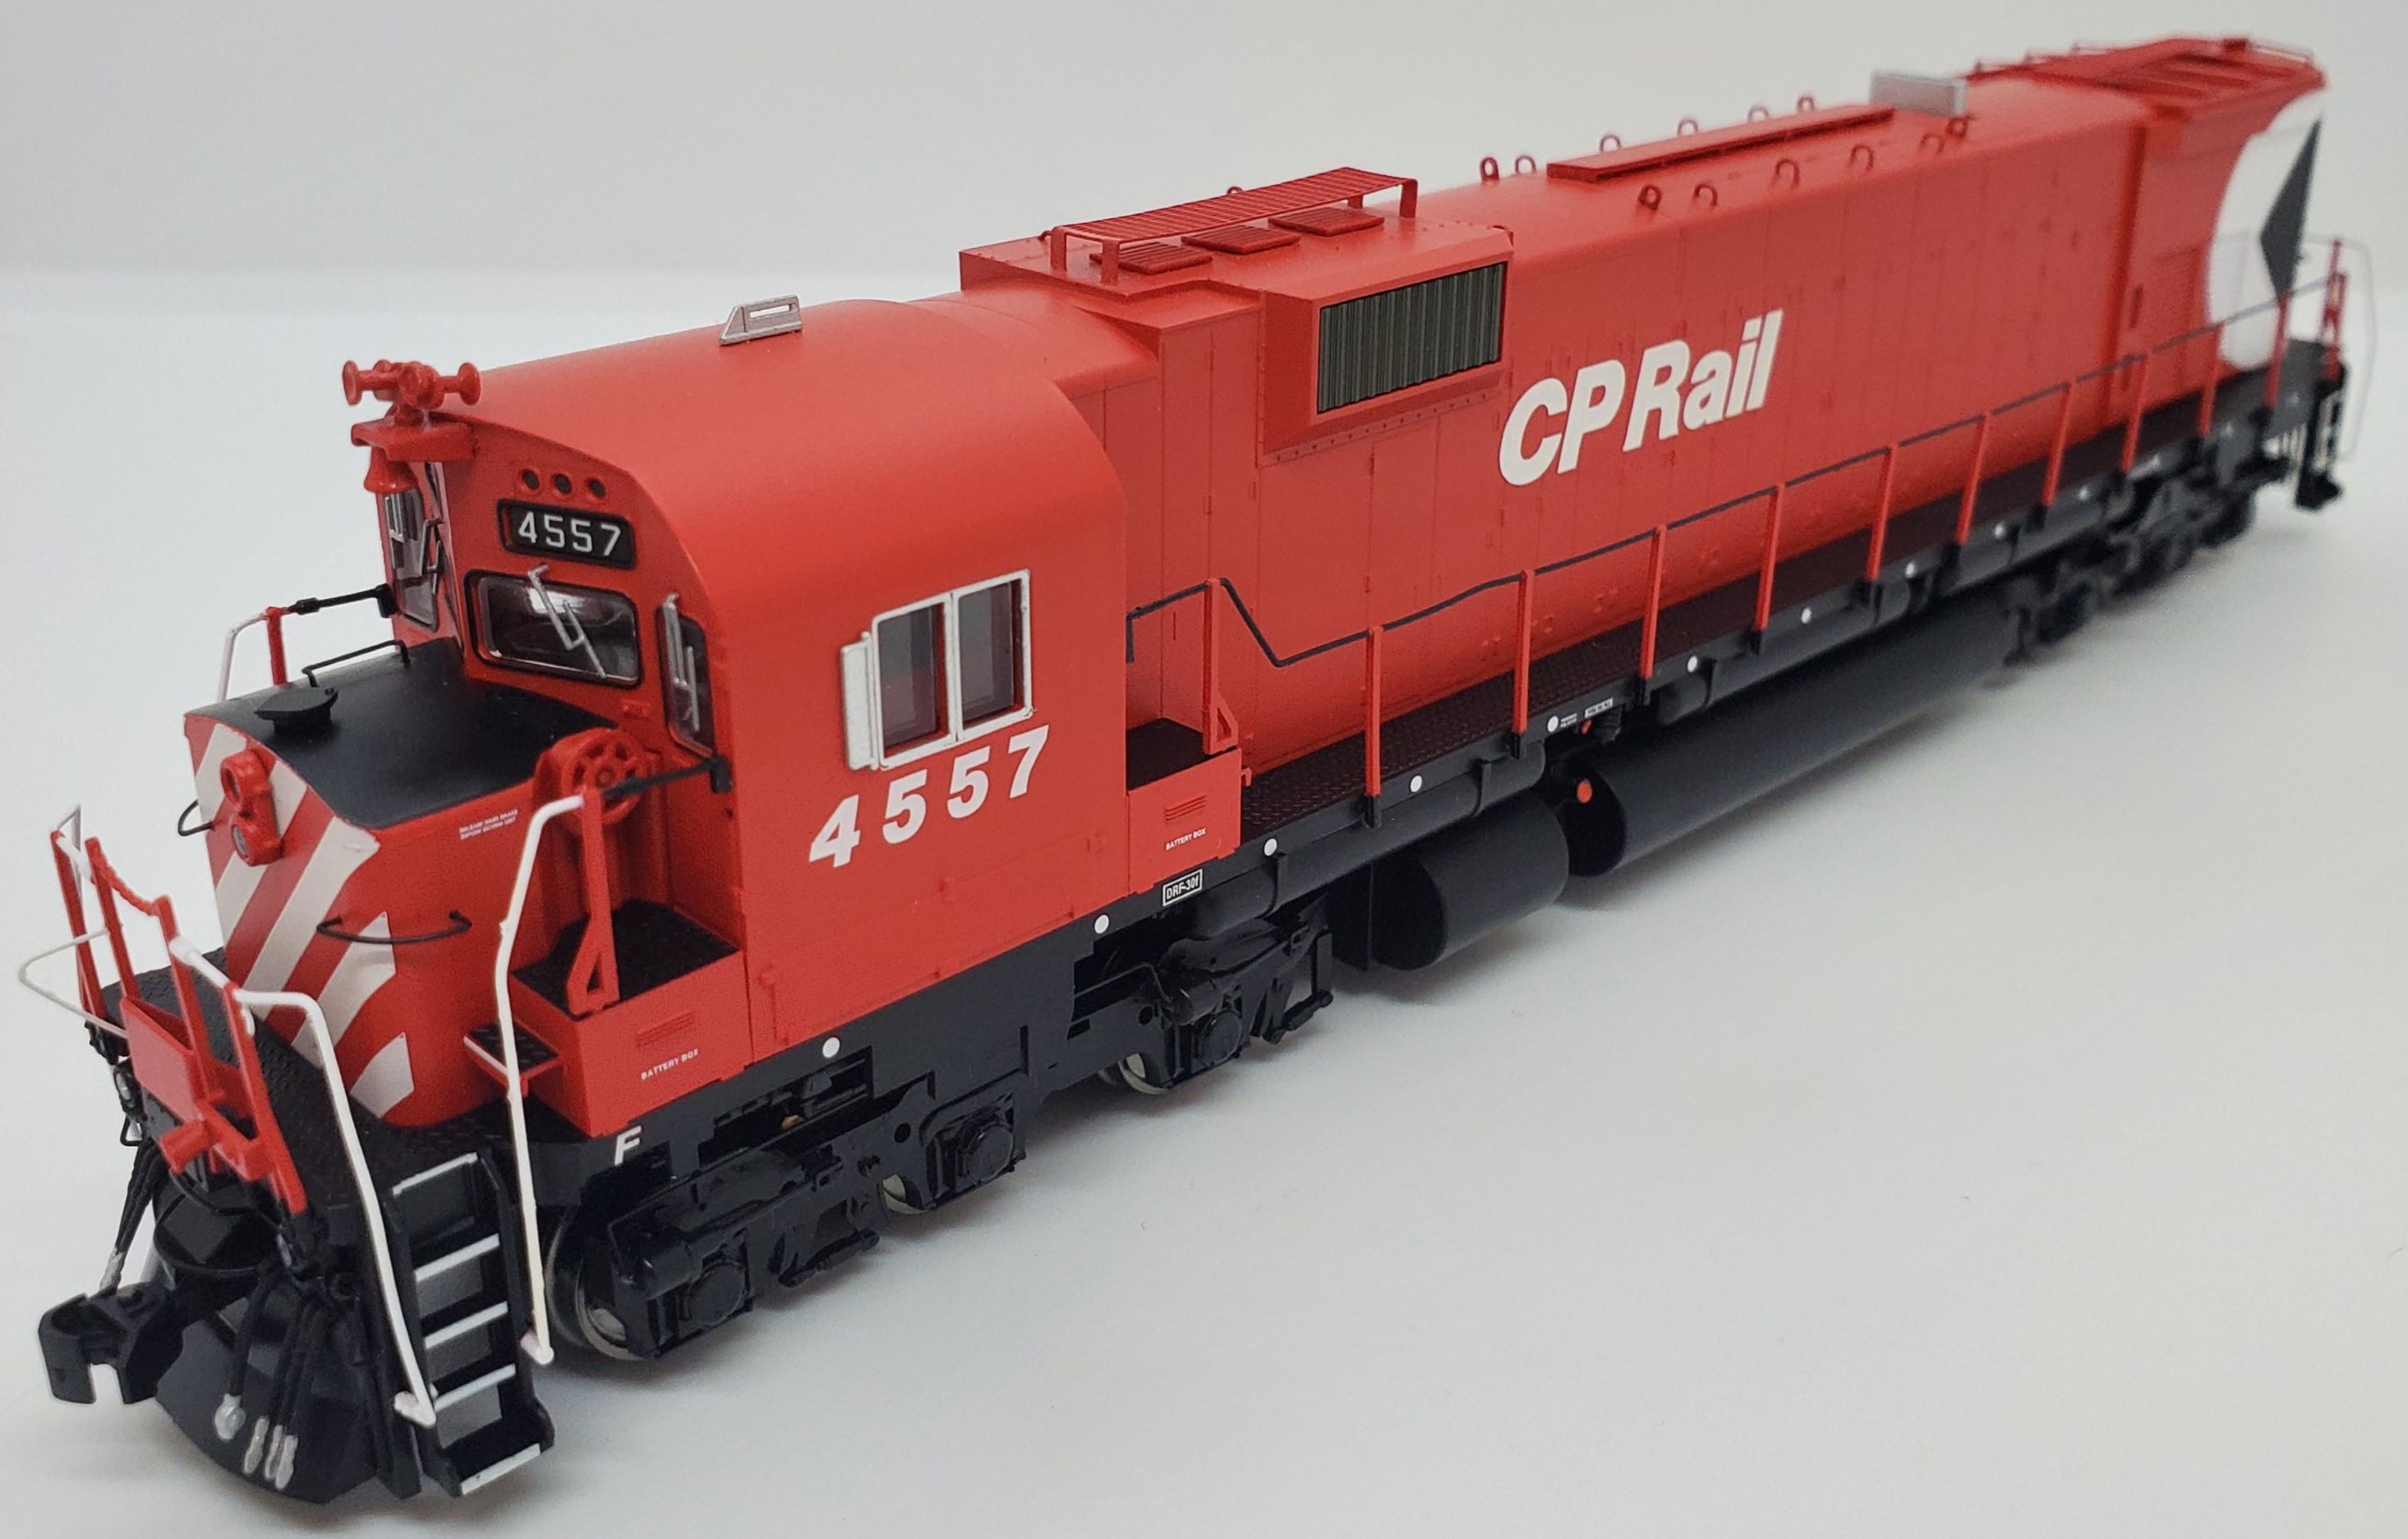 Bowser 24831 - HO MLW M630 - DC/DCC Ready - CP Rail (Multimark) #4557